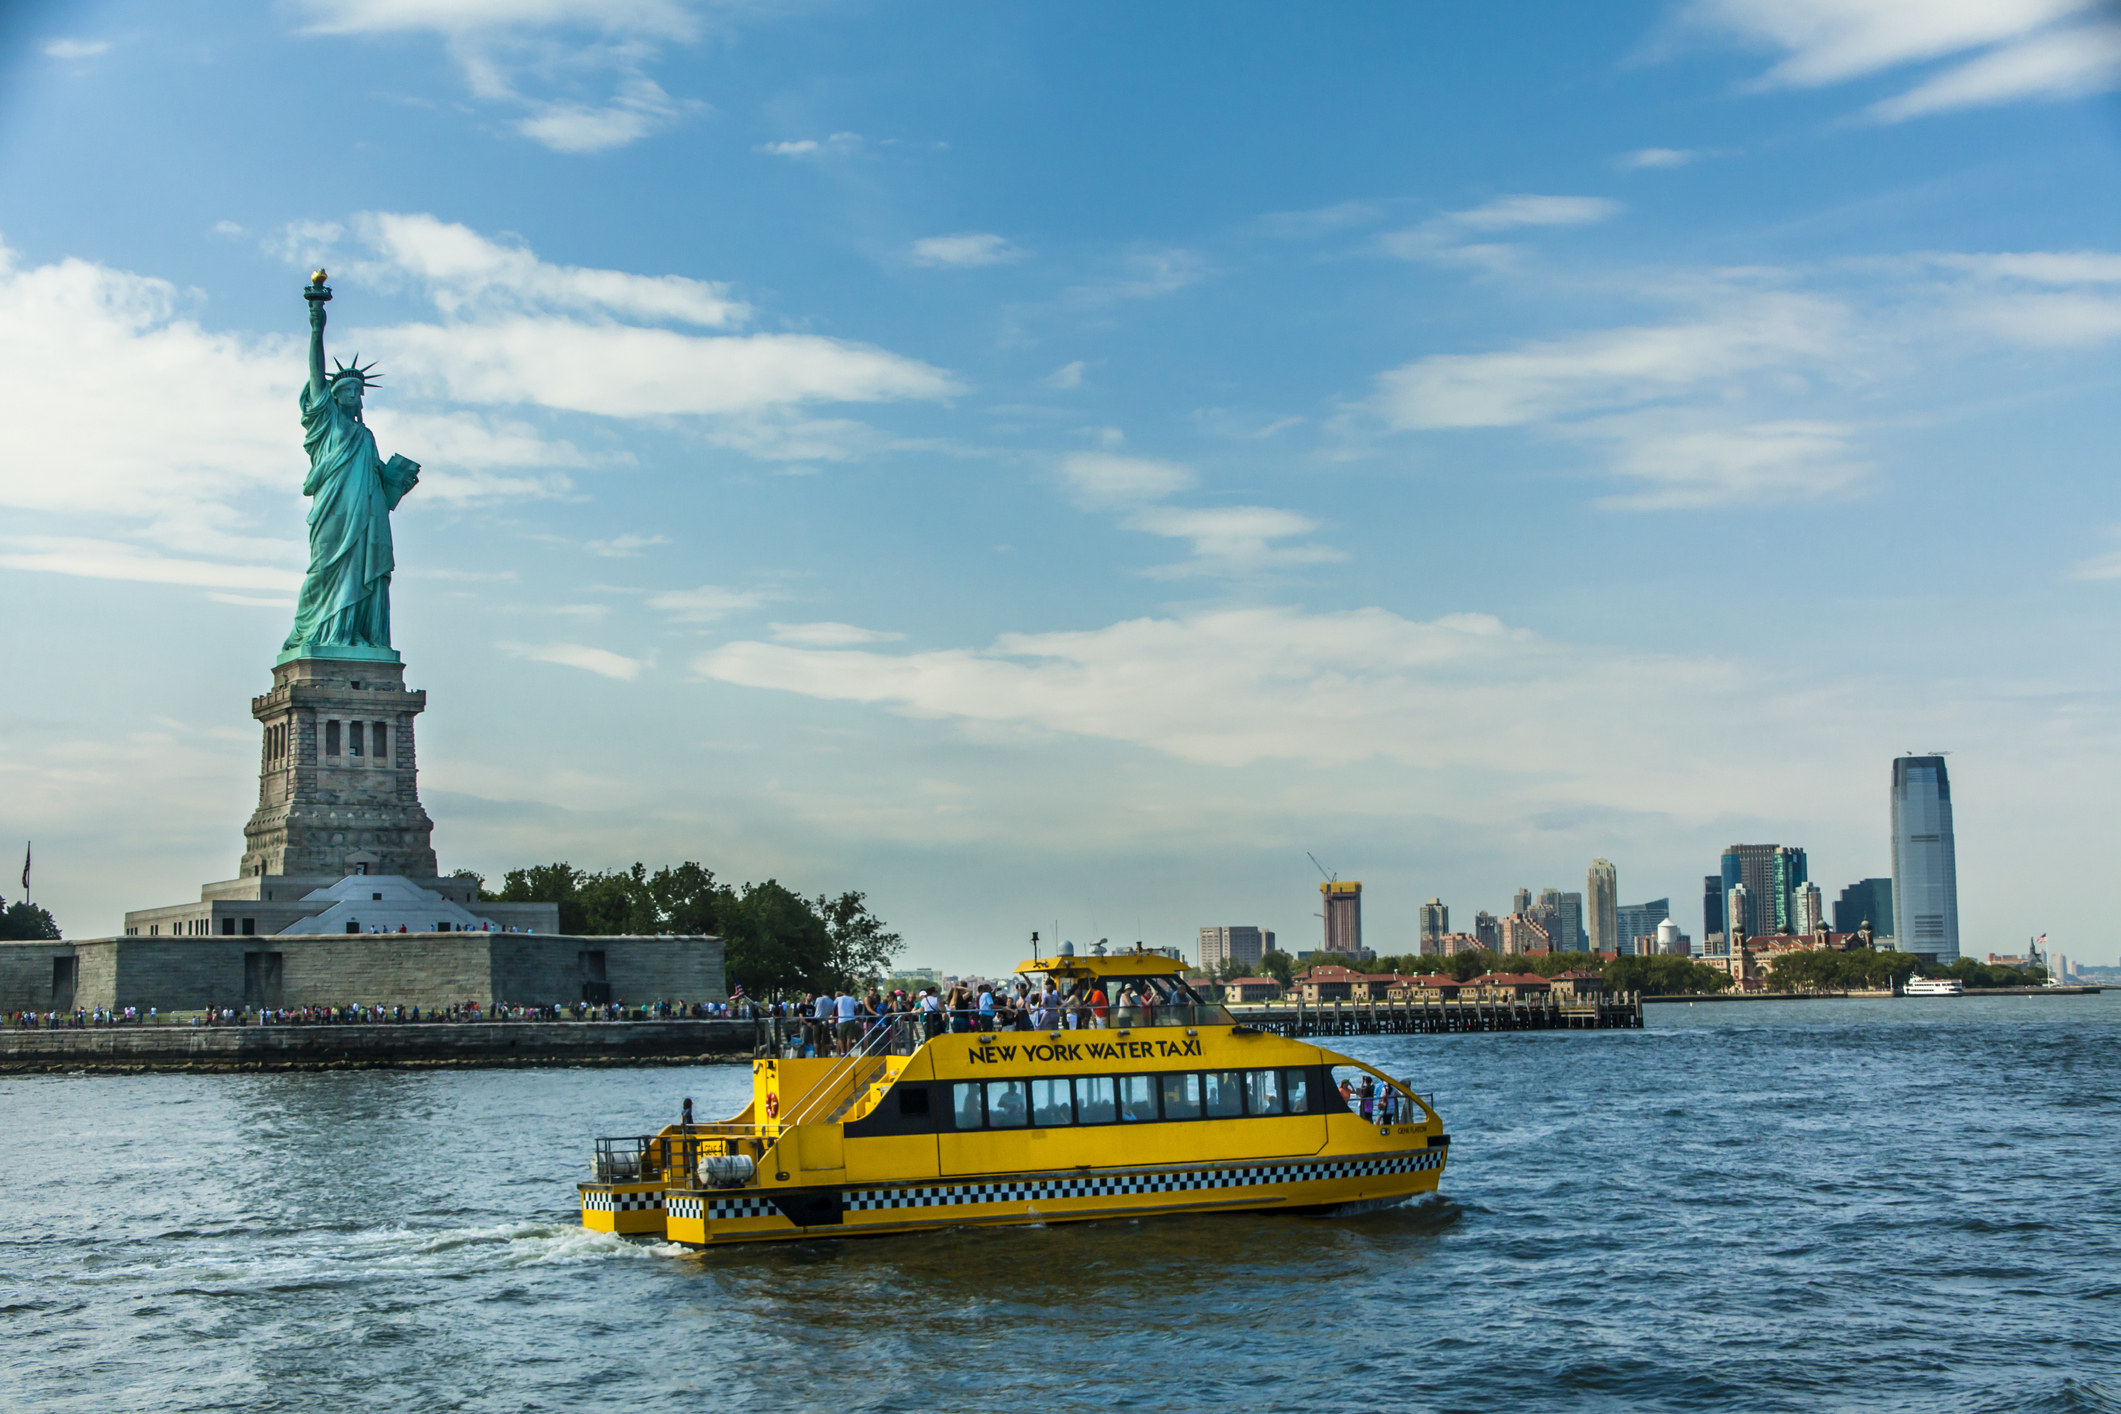 Statue of Liberty and Tour Boat and lower Manhattan.